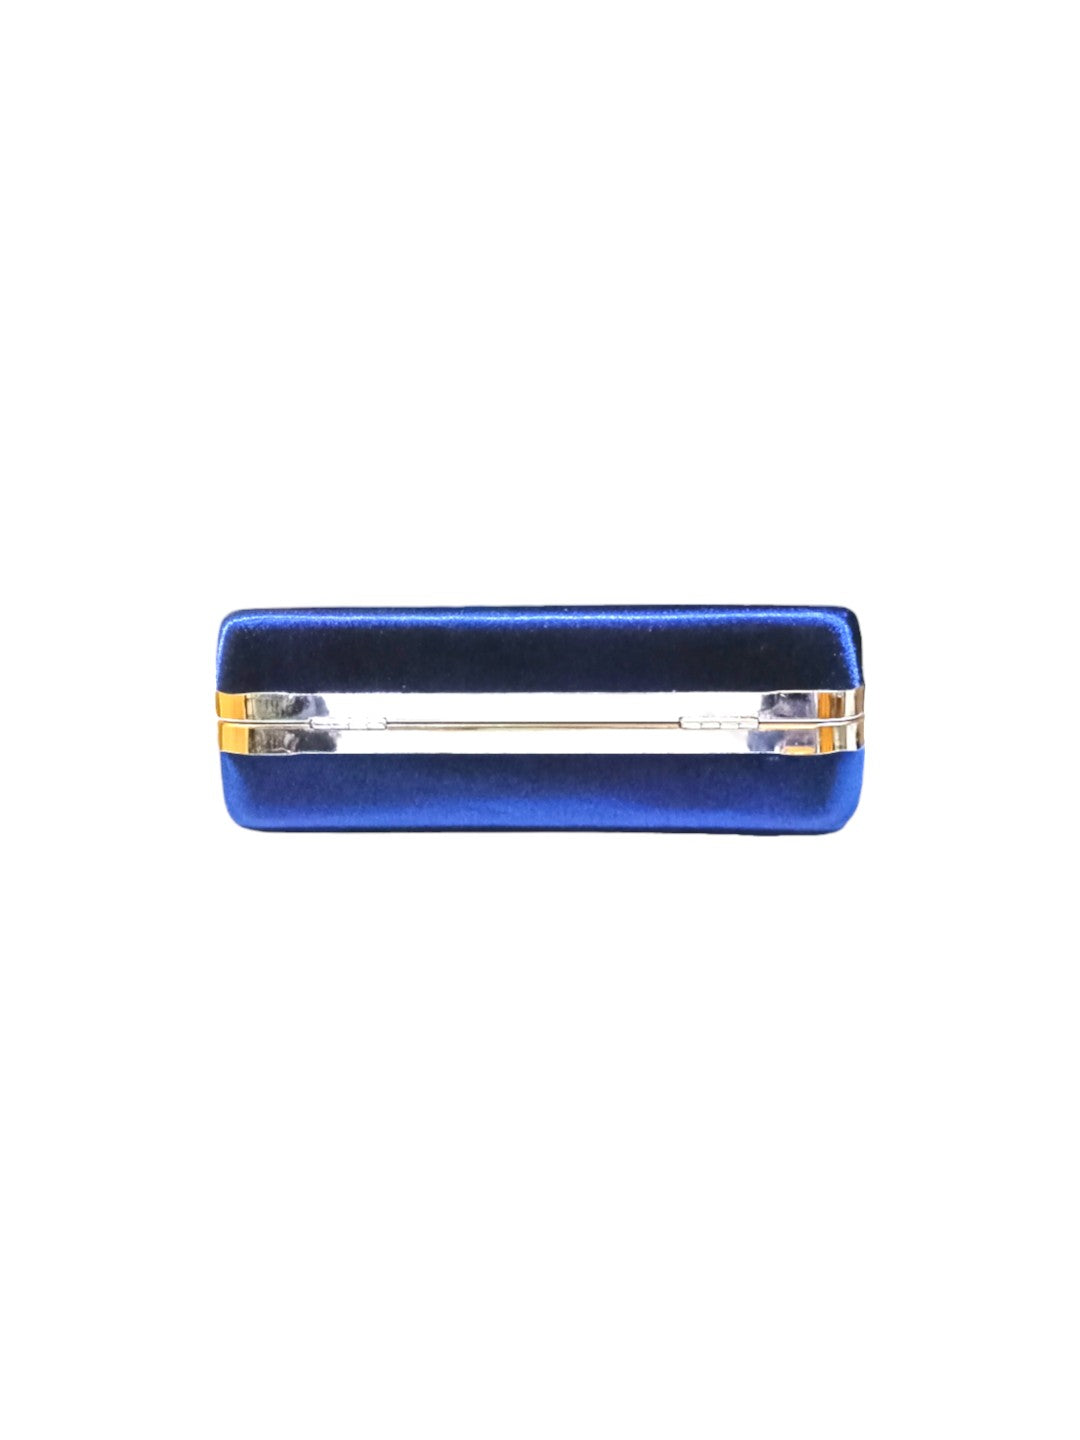 A Vdesi handle clutch made form quality materials. 